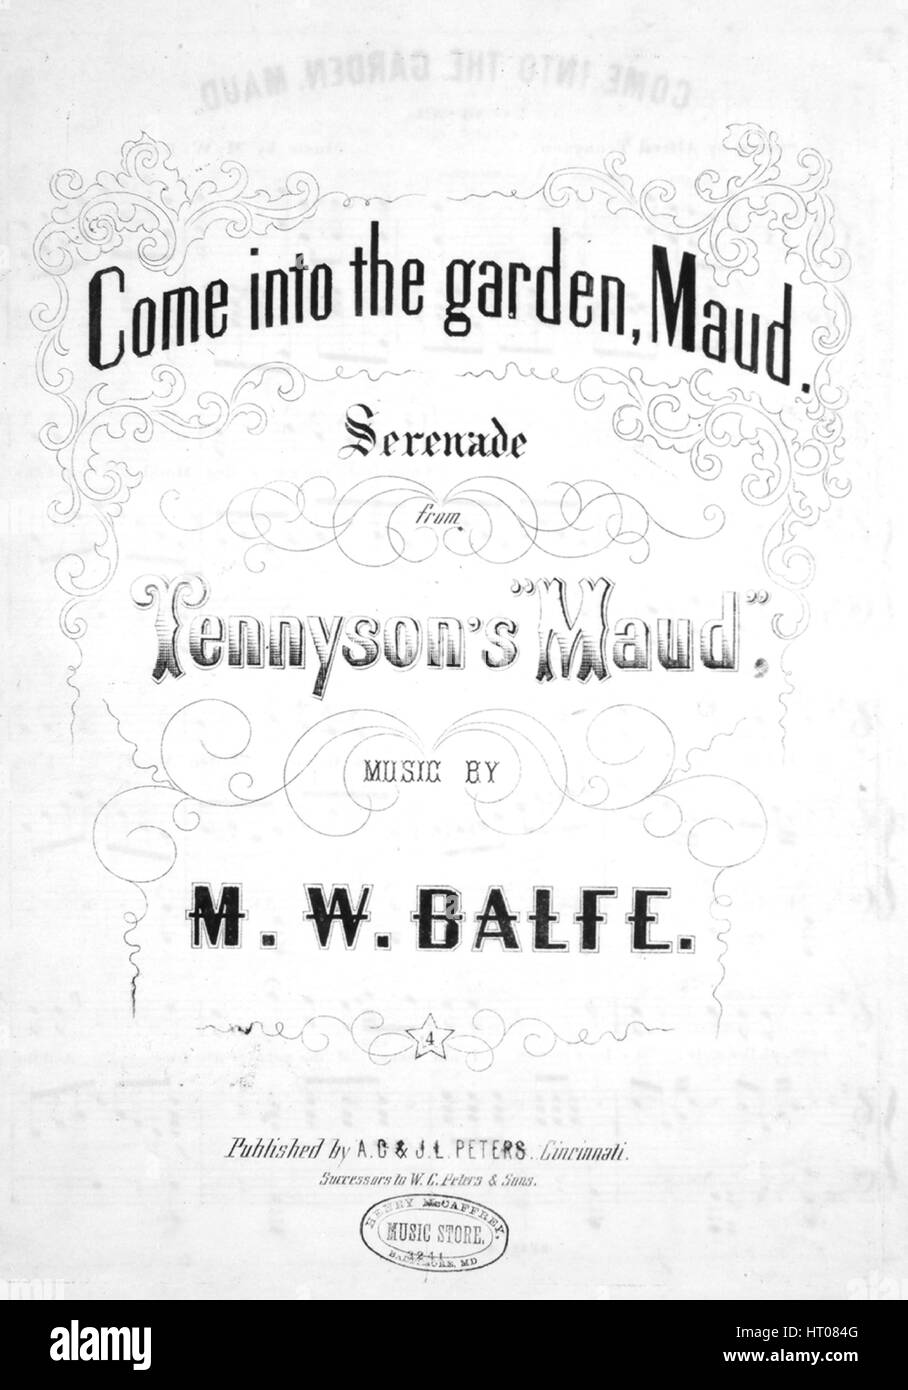 Sheet Music Cover Image Of The Song Come Into The Garden Maud Serenade From Tennysons Maud With Original Authorship Notes Reading Alfred Tennyson Arrangement By Mw Balfe United States 1900 The Publisher